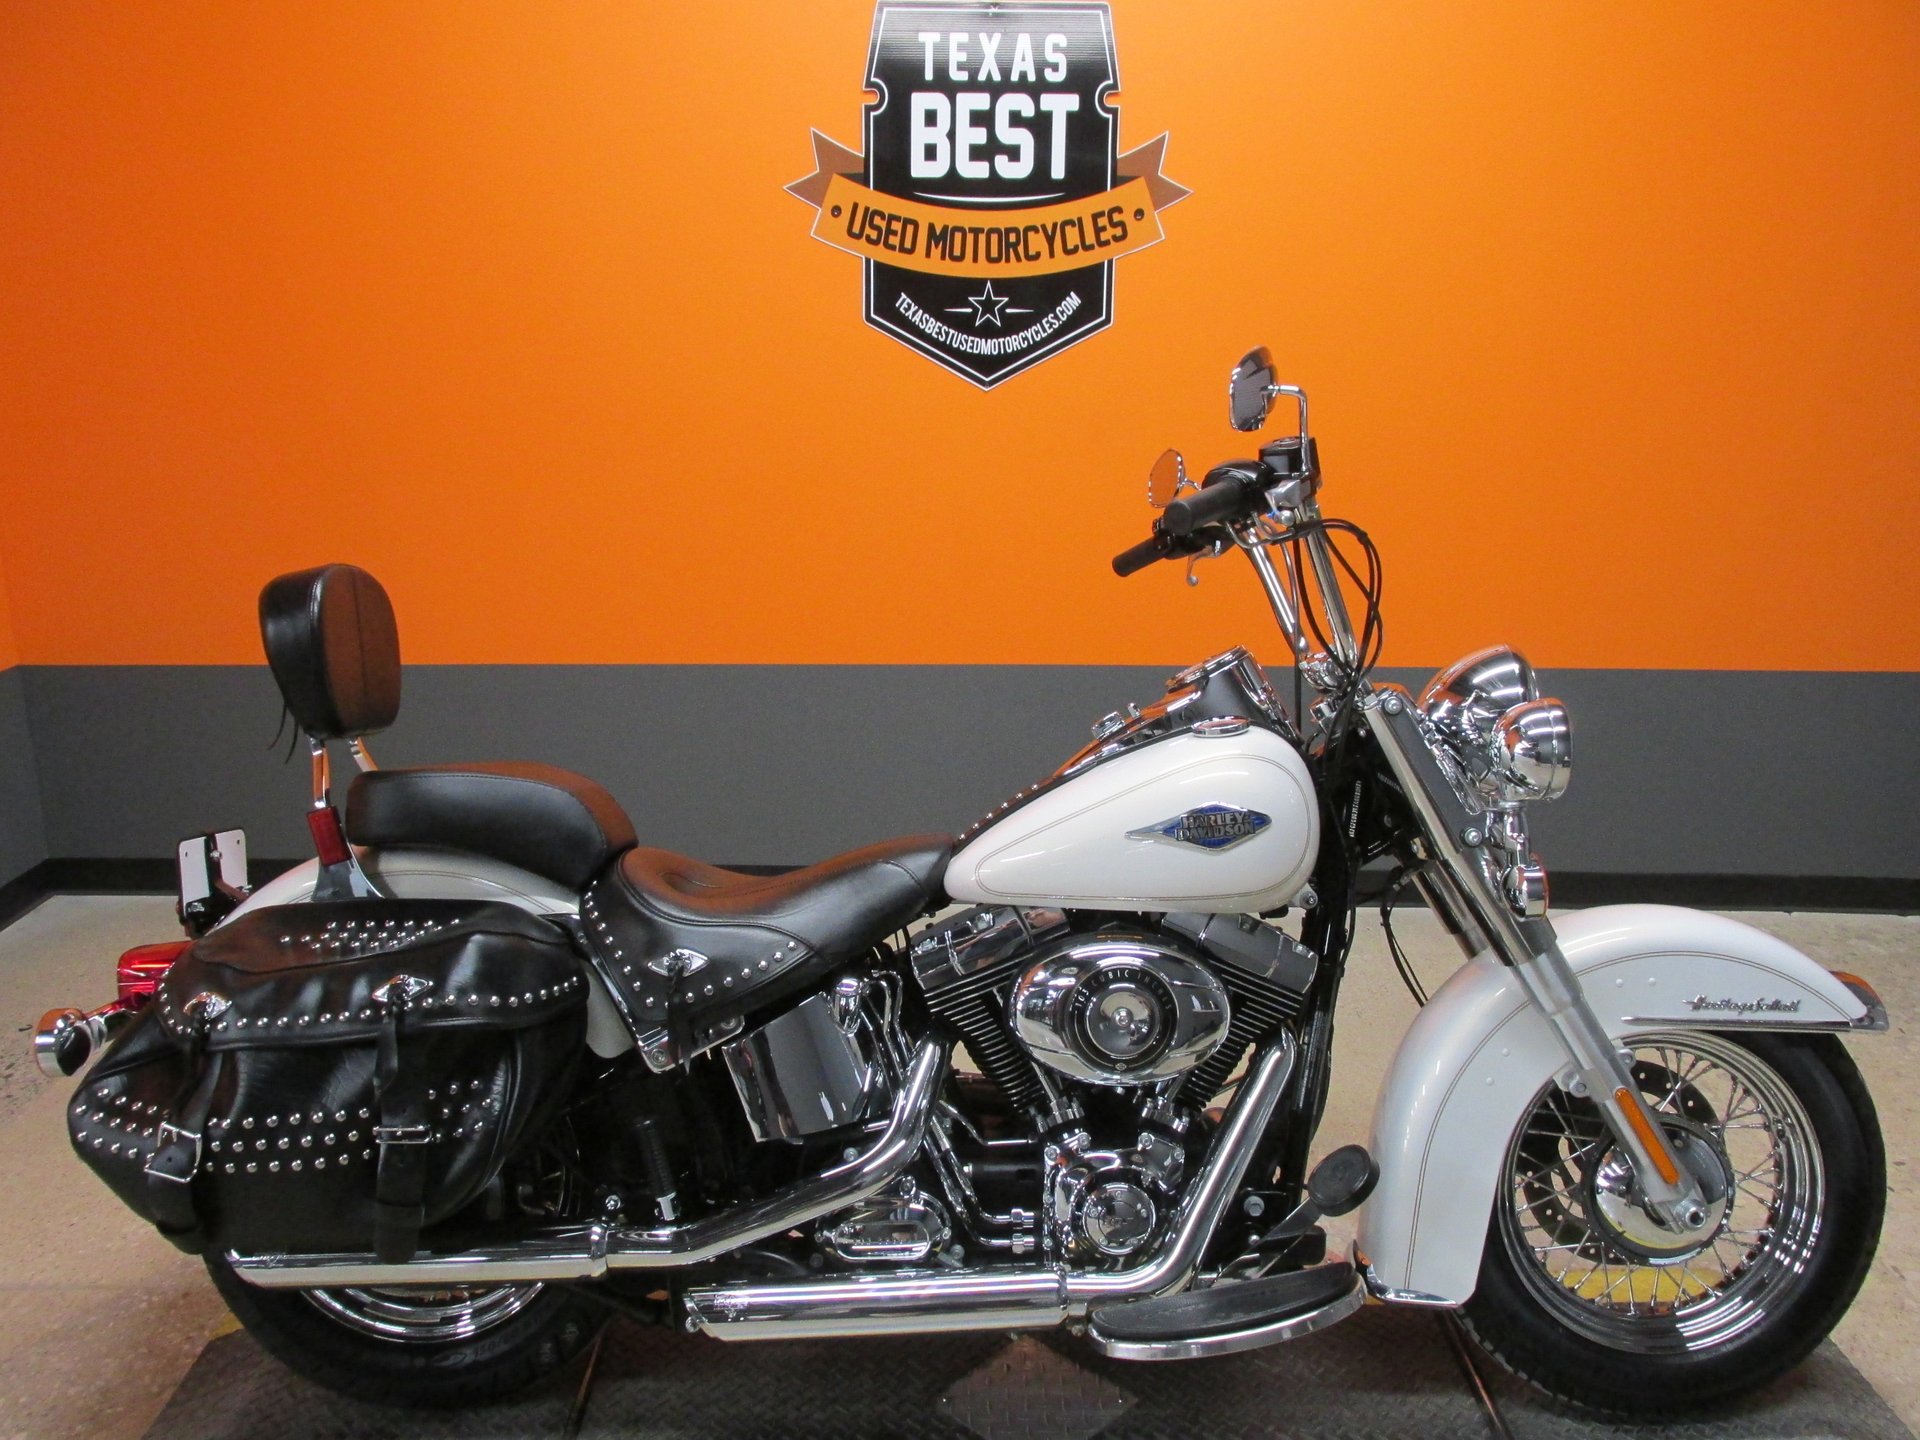 2014 Harley Davidson Softail Heritage Classic American Motorcycle Trading Company Used Harley Davidson Motorcycles